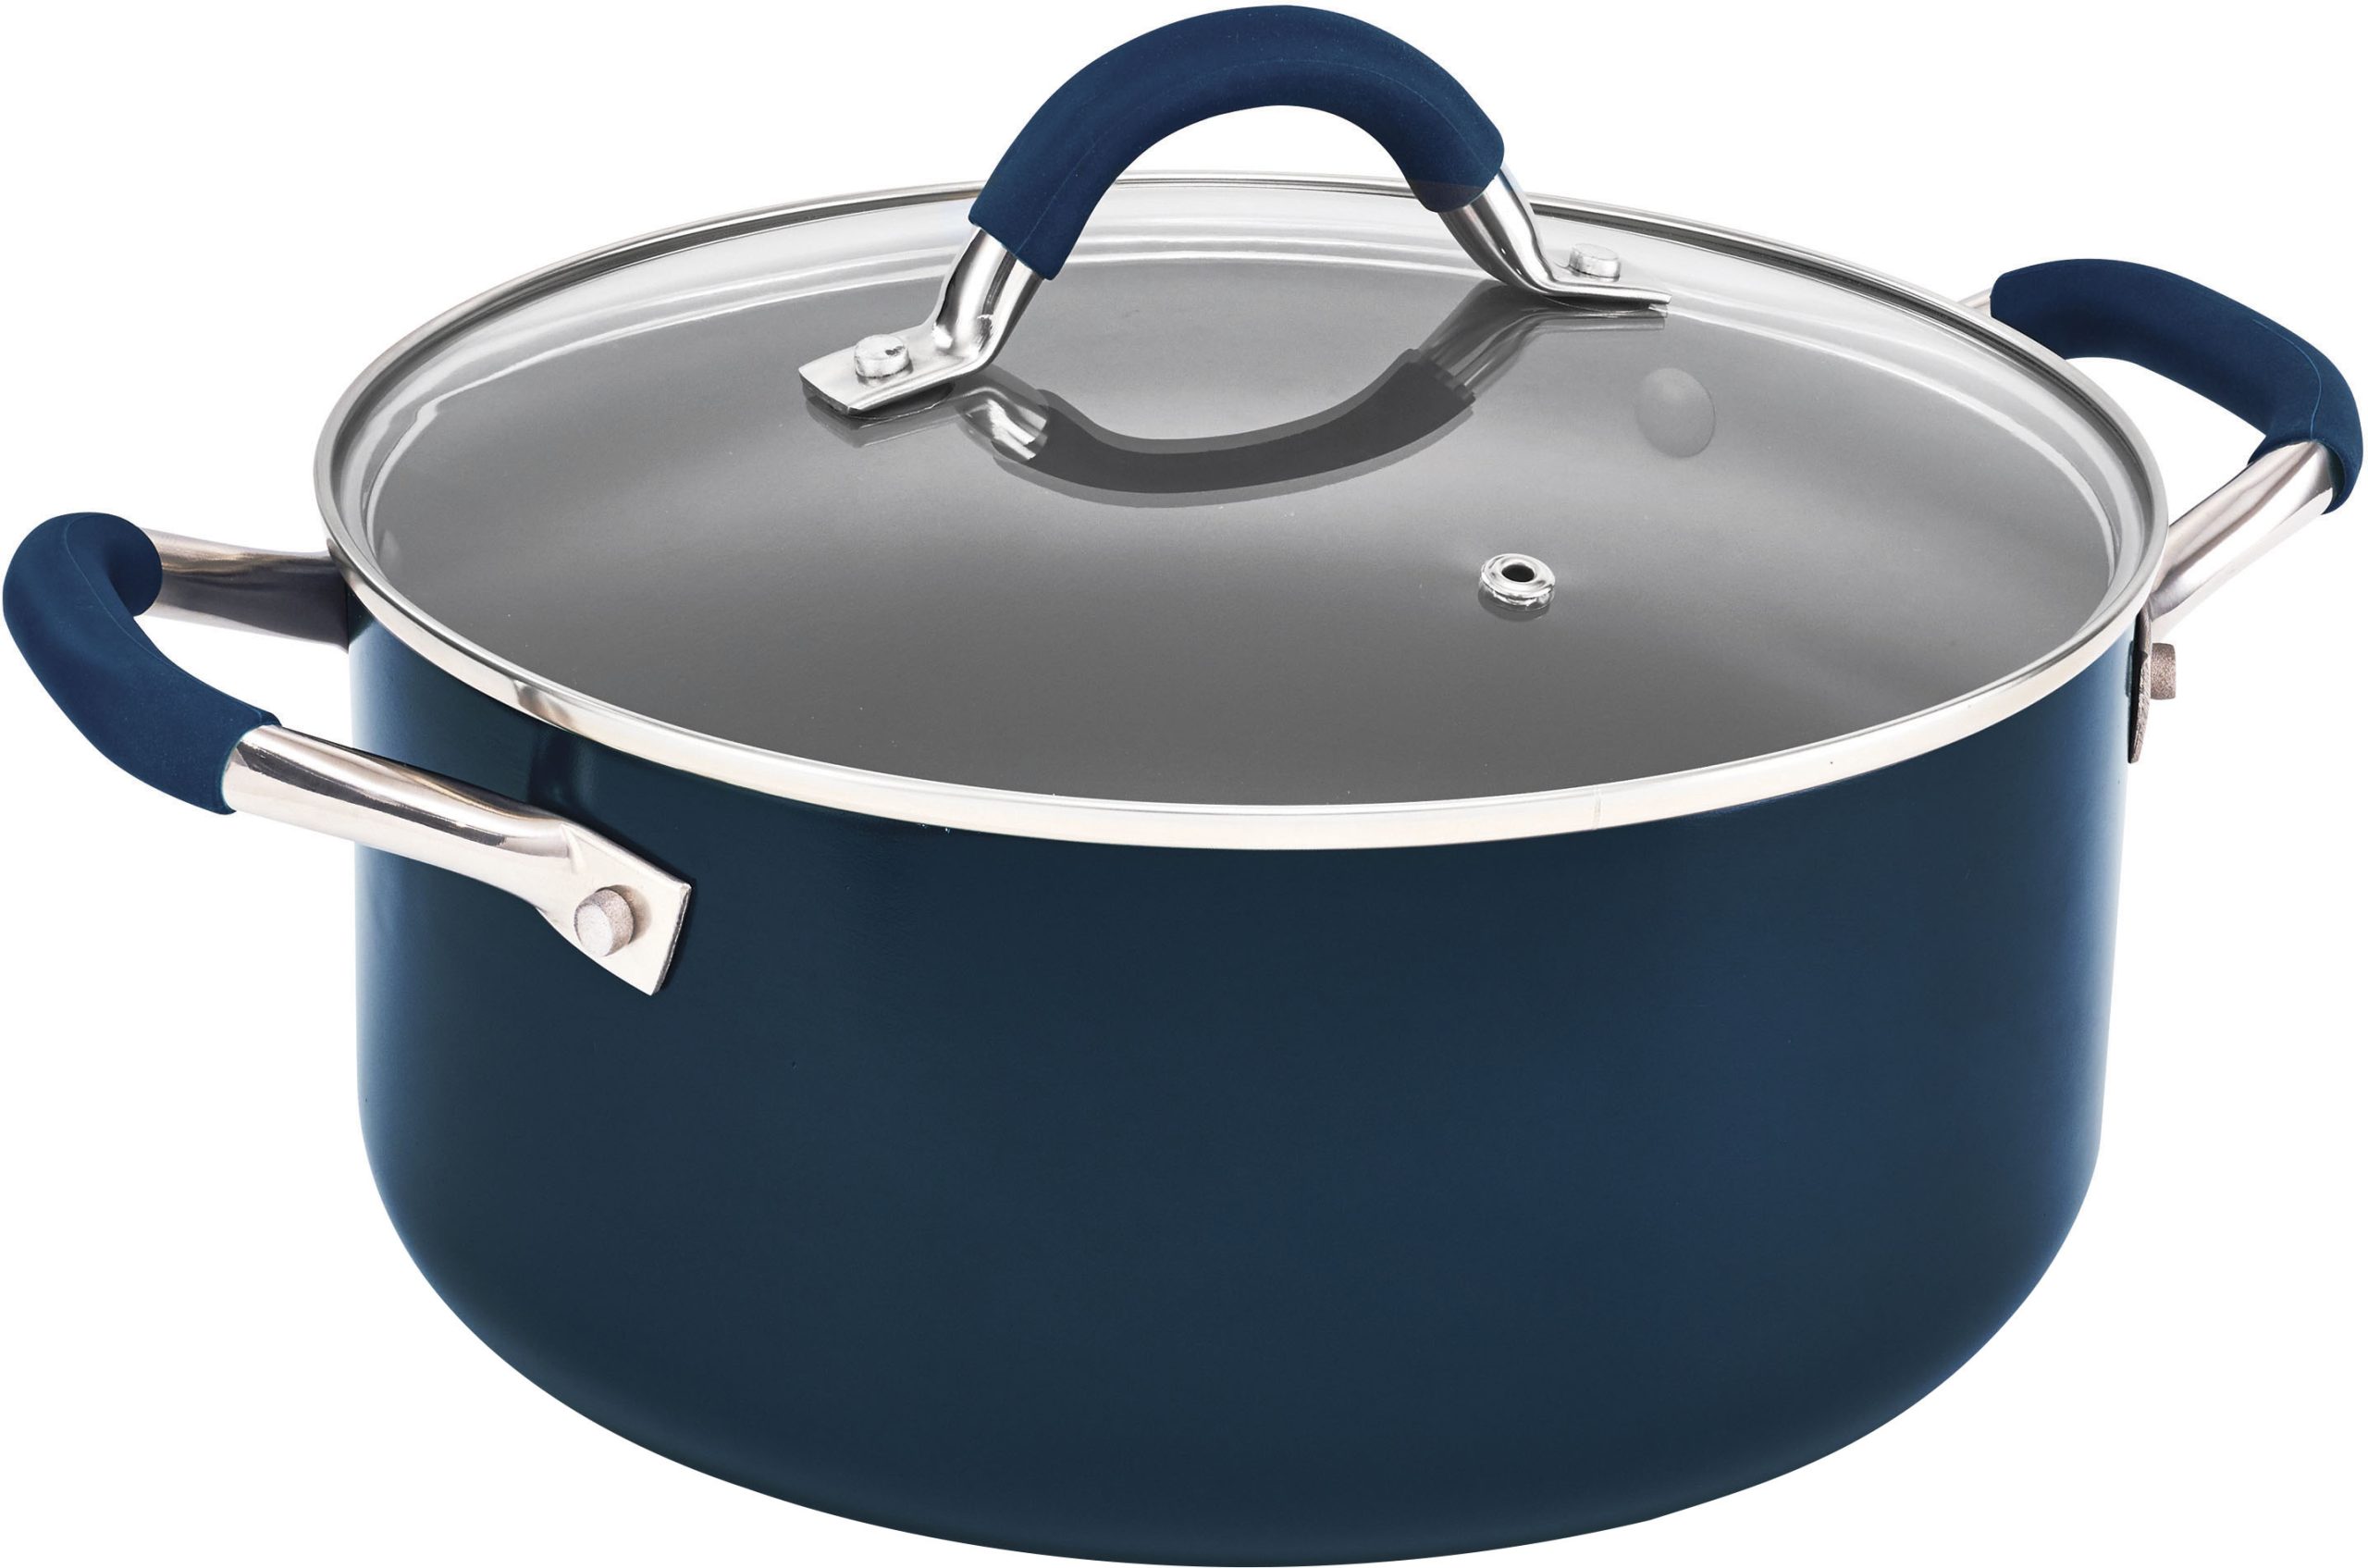 Bella Pro Series – 12-Piece Cookware Set – Ink Blue – Just $49.99 at Best Buy